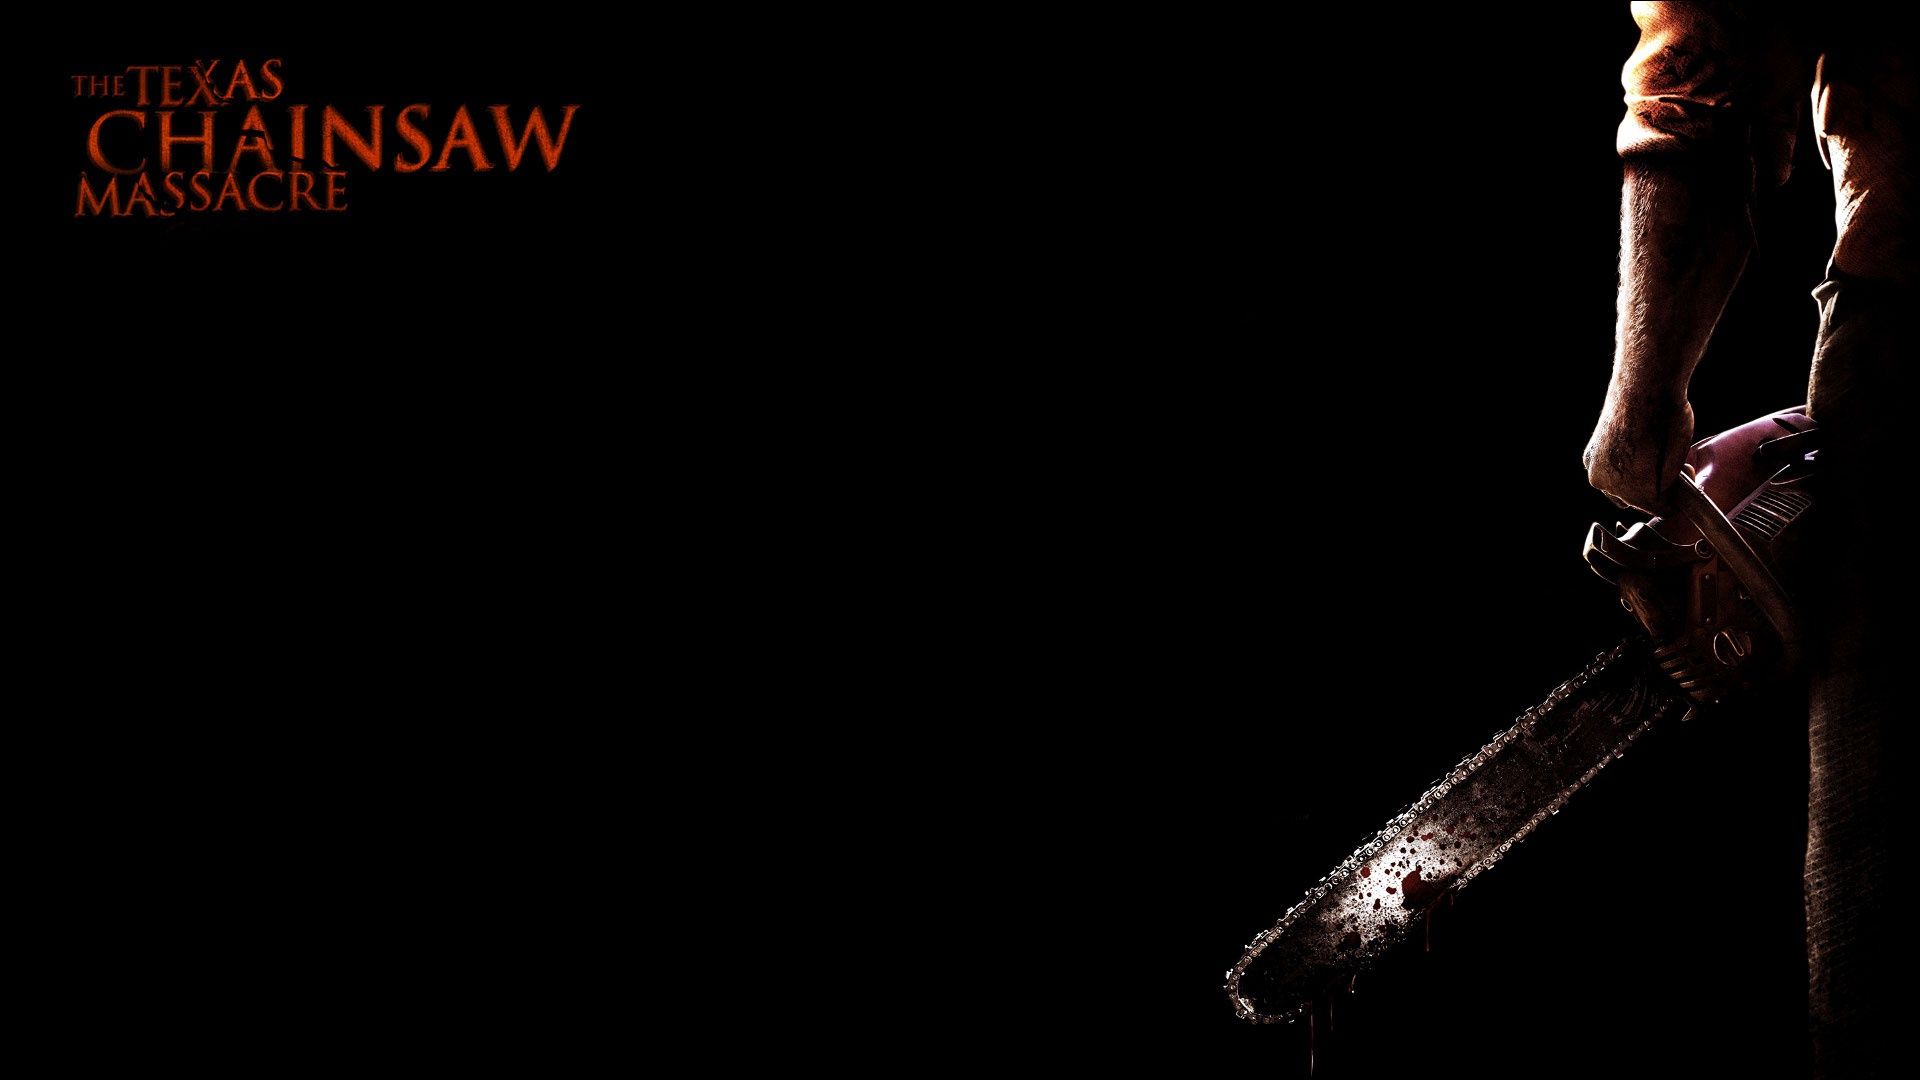 Texas Chainsaw Massacre Wallpapers | HD Wallpapers